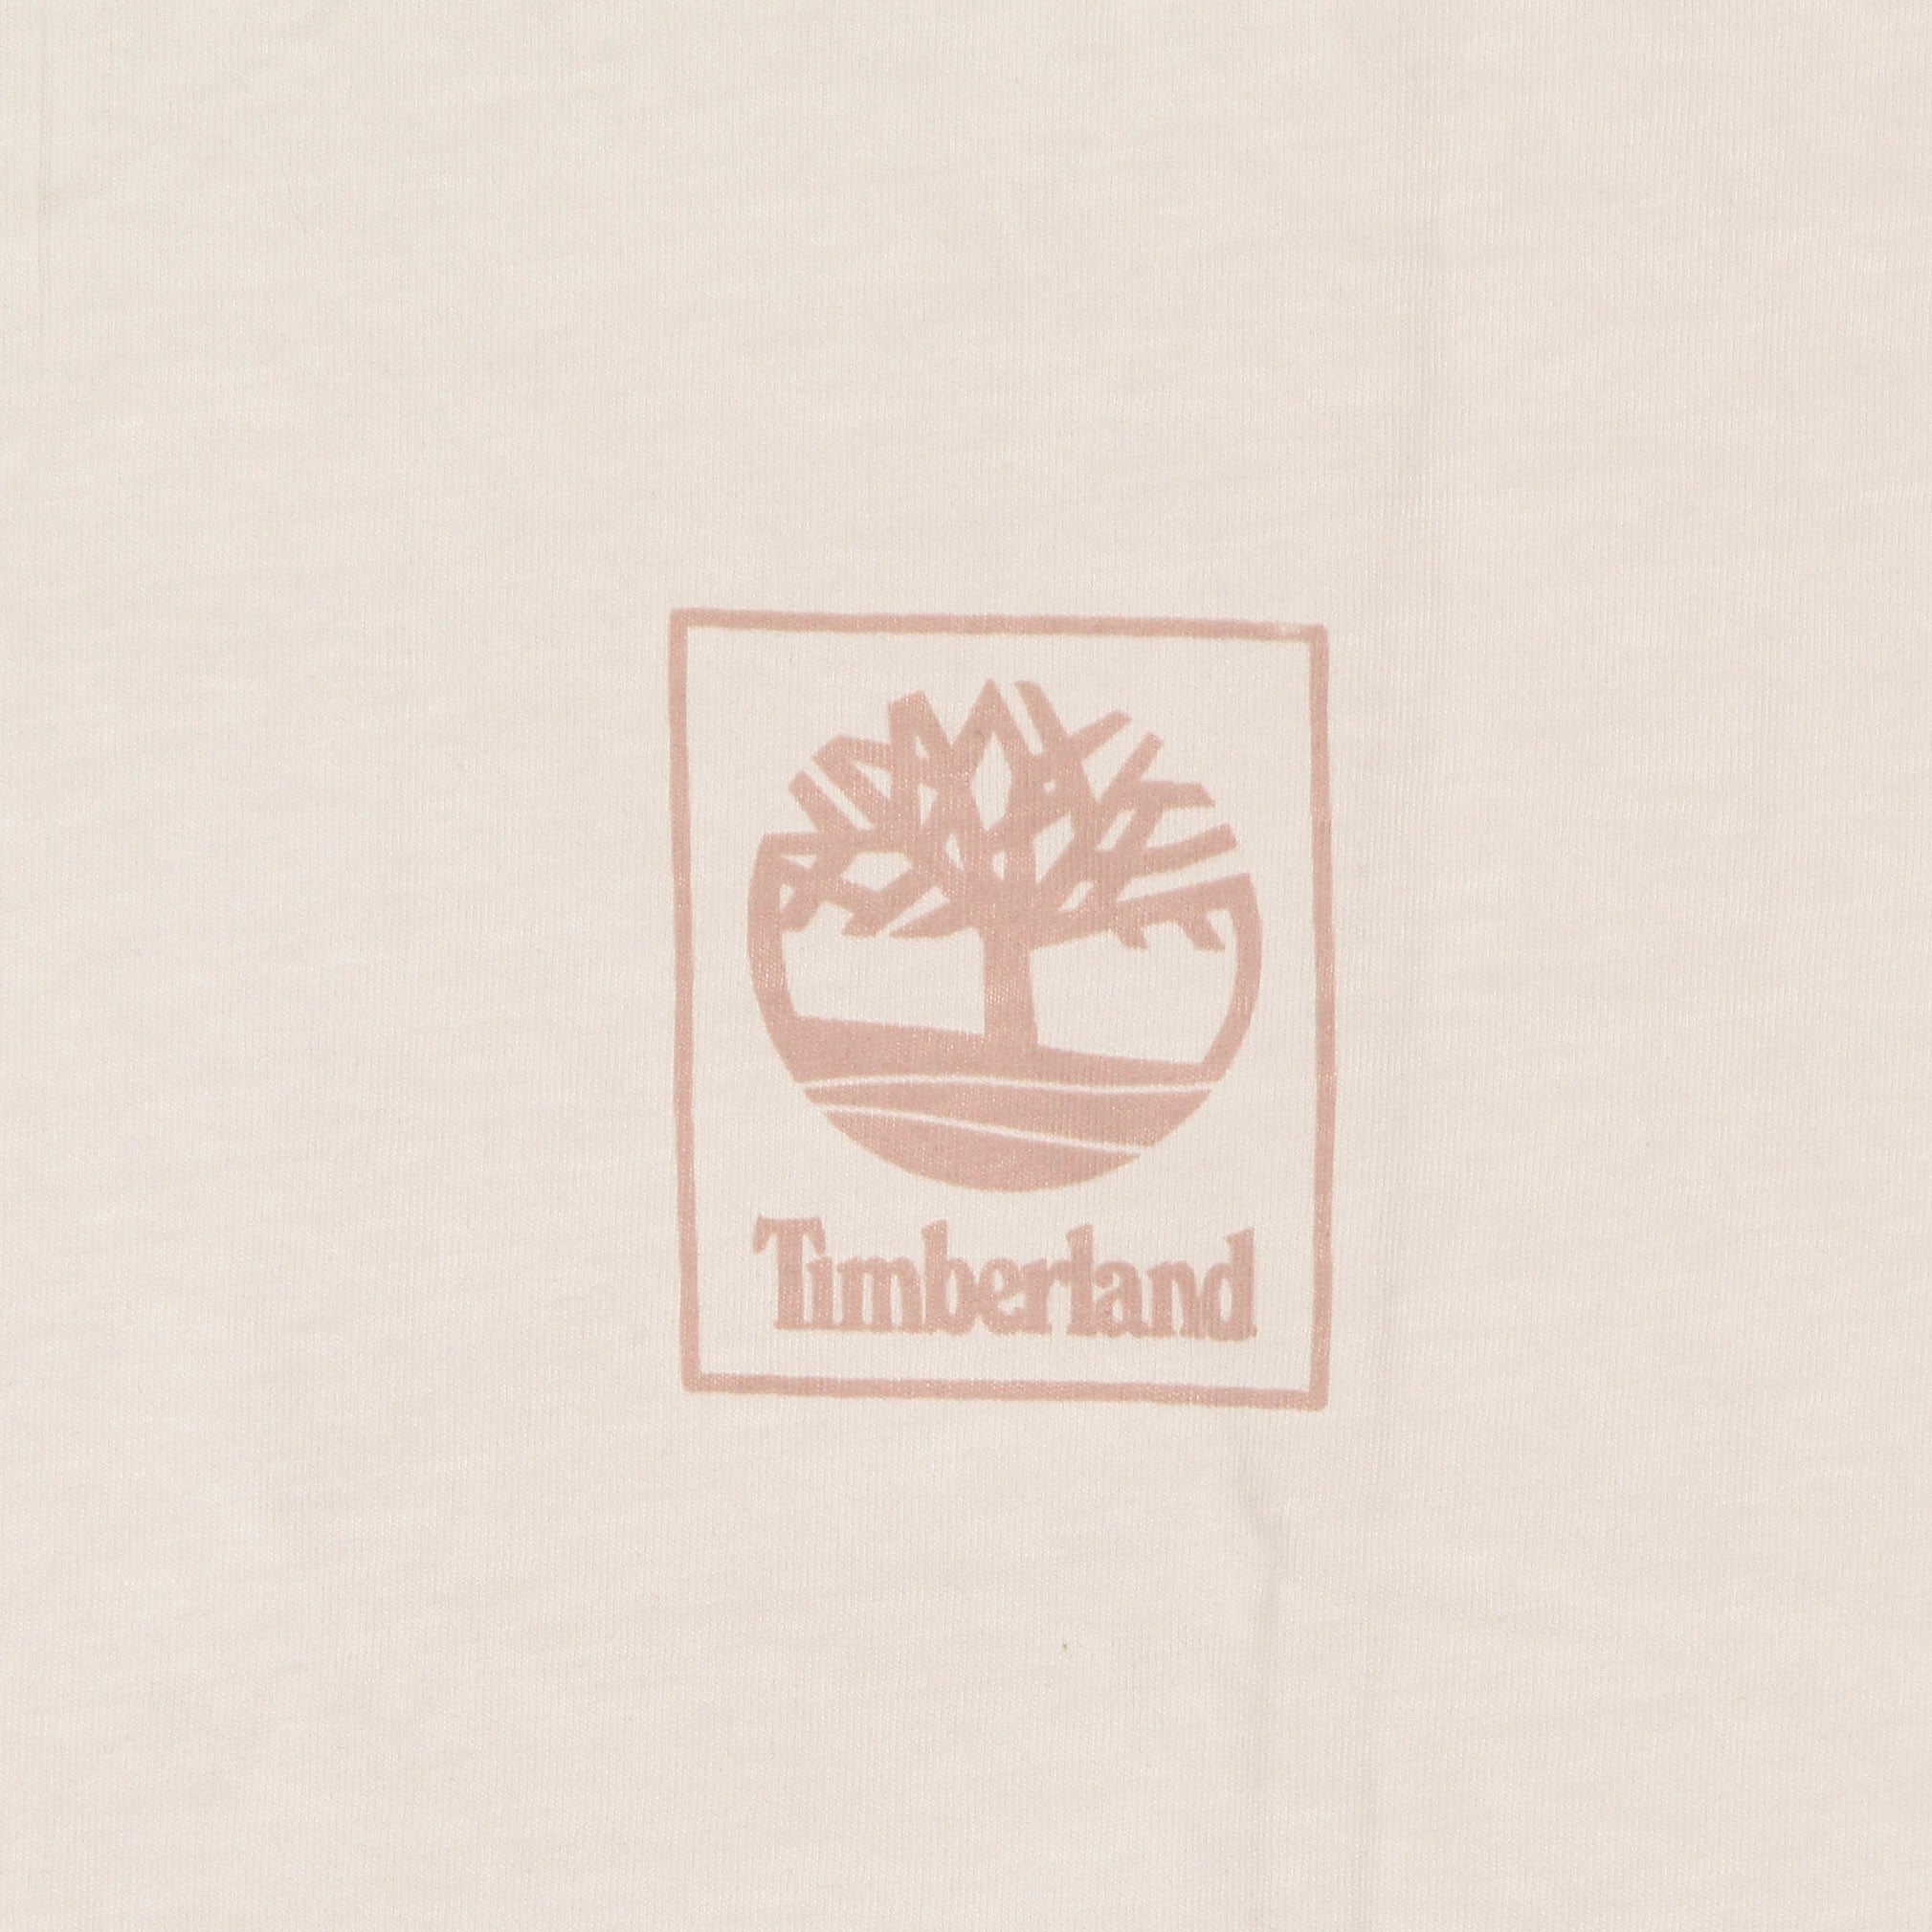 Timberland, Maglietta Donna Cropped Tee, 